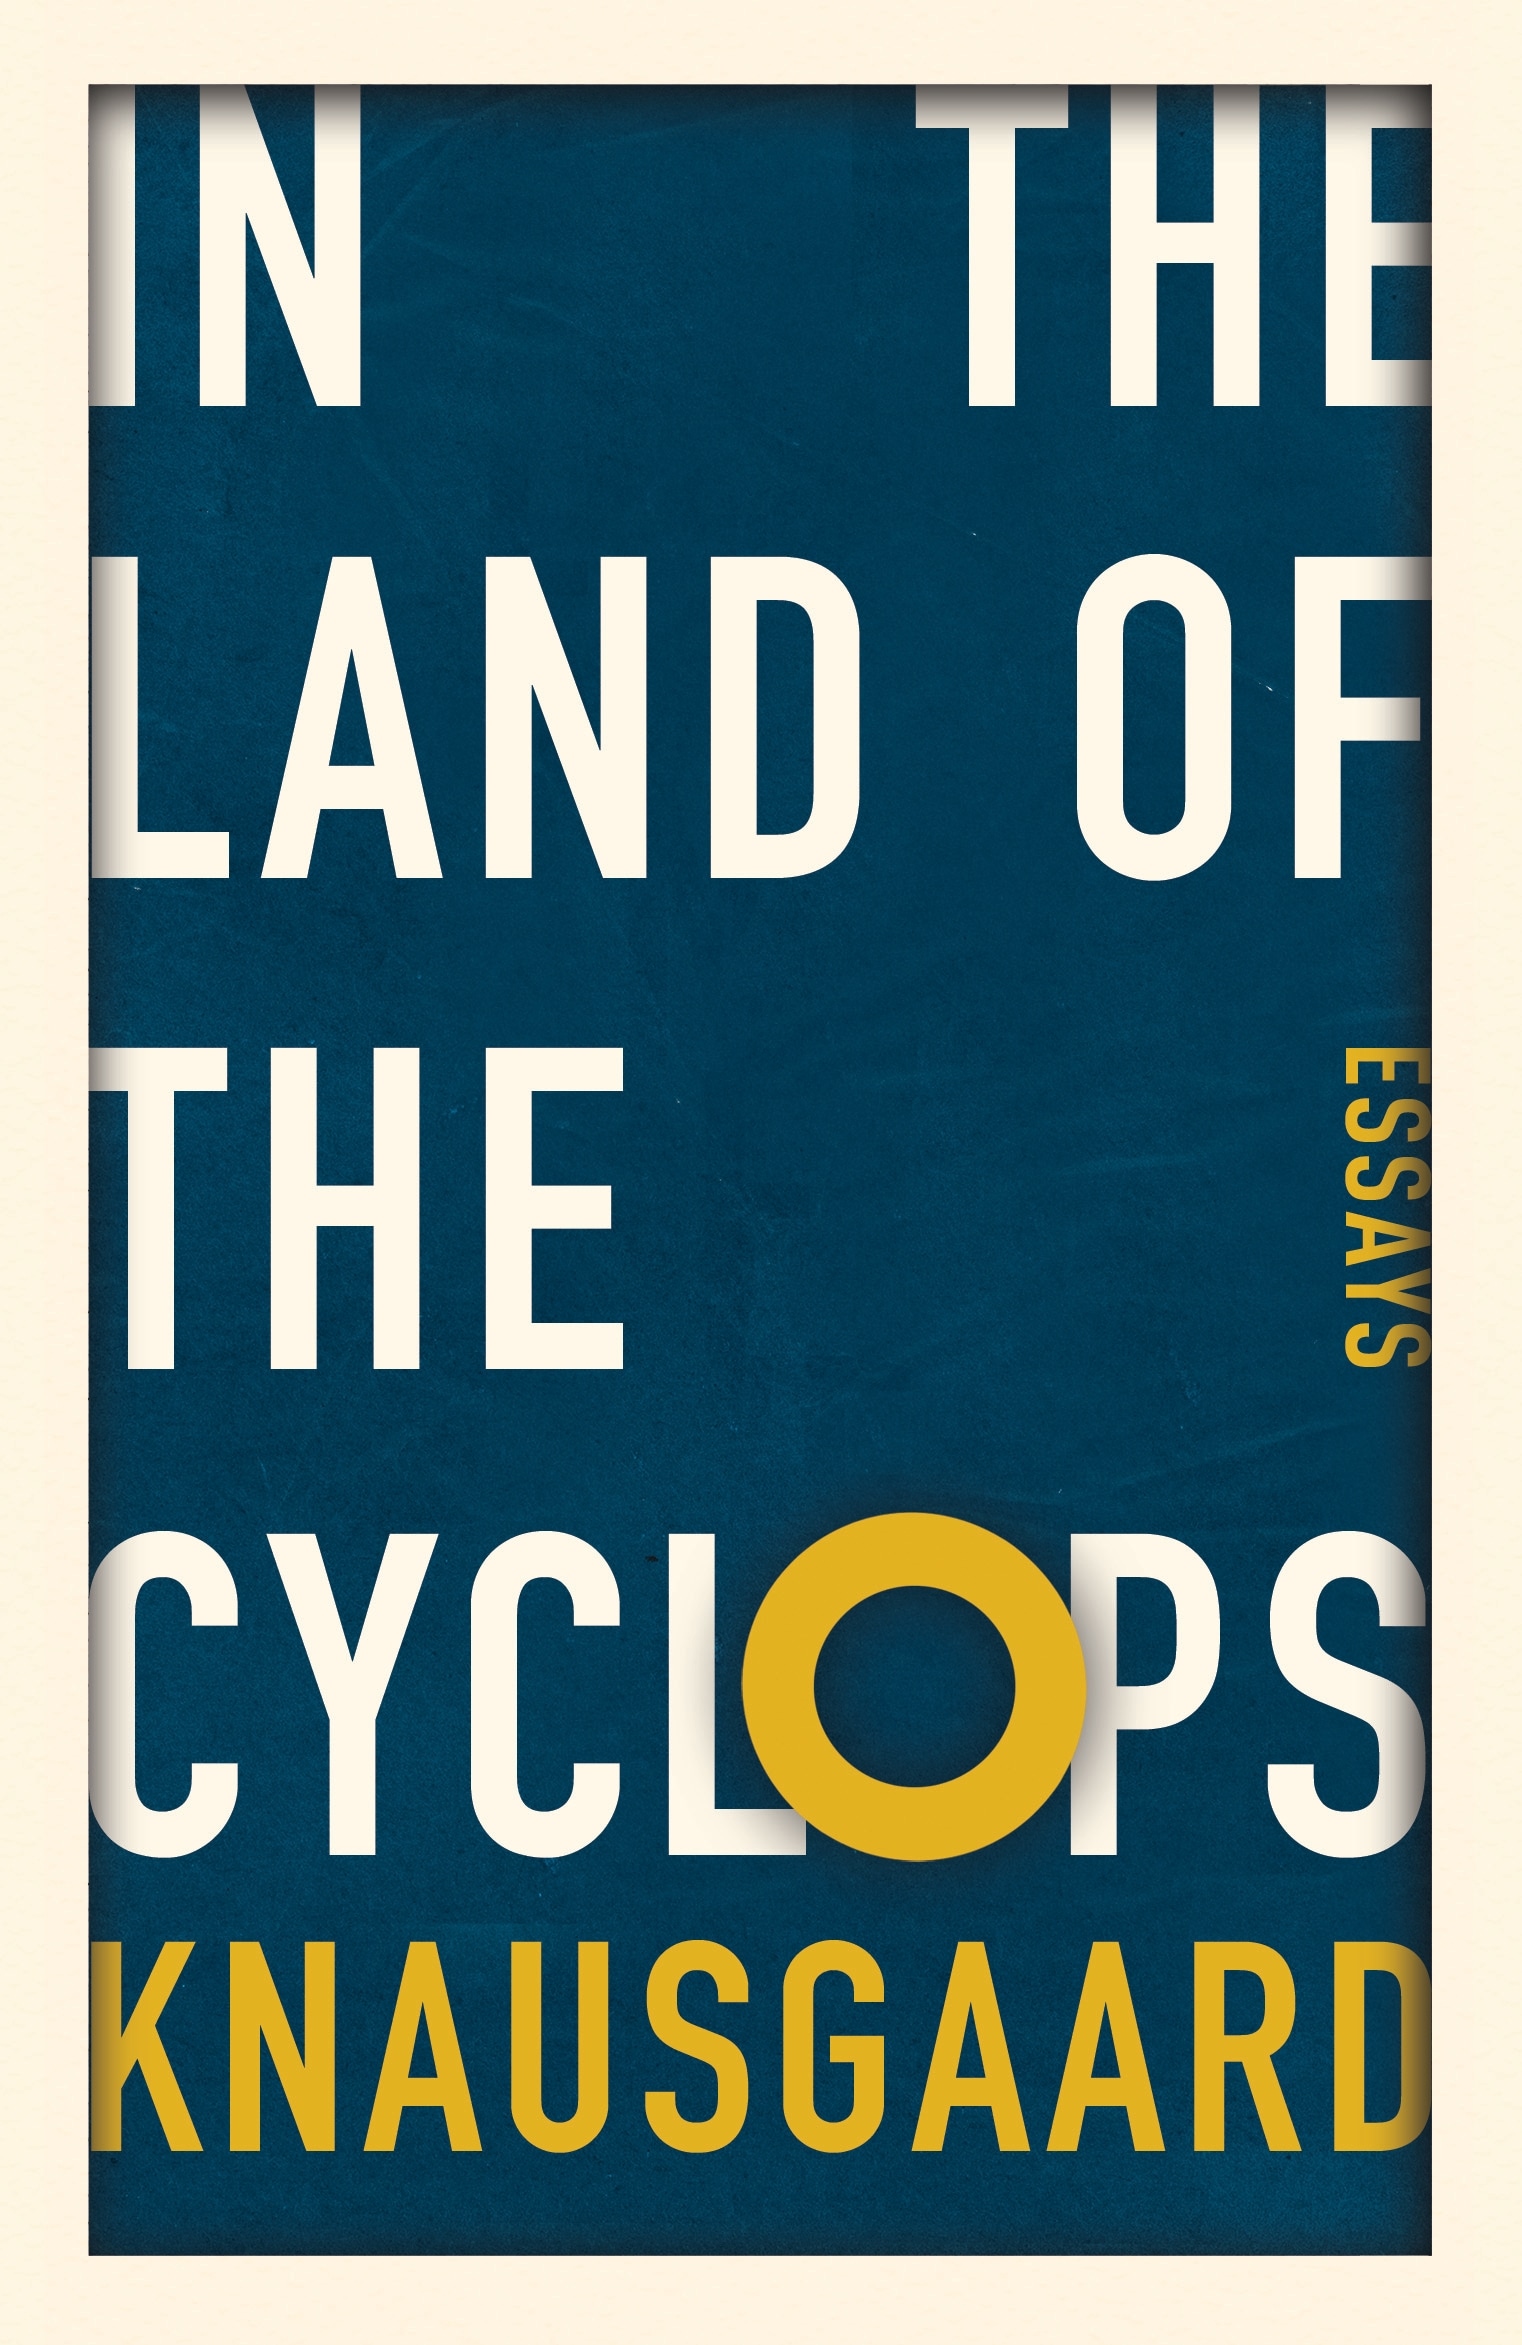 Book “In the Land of the Cyclops” by Karl Ove Knausgaard — January 5, 2023